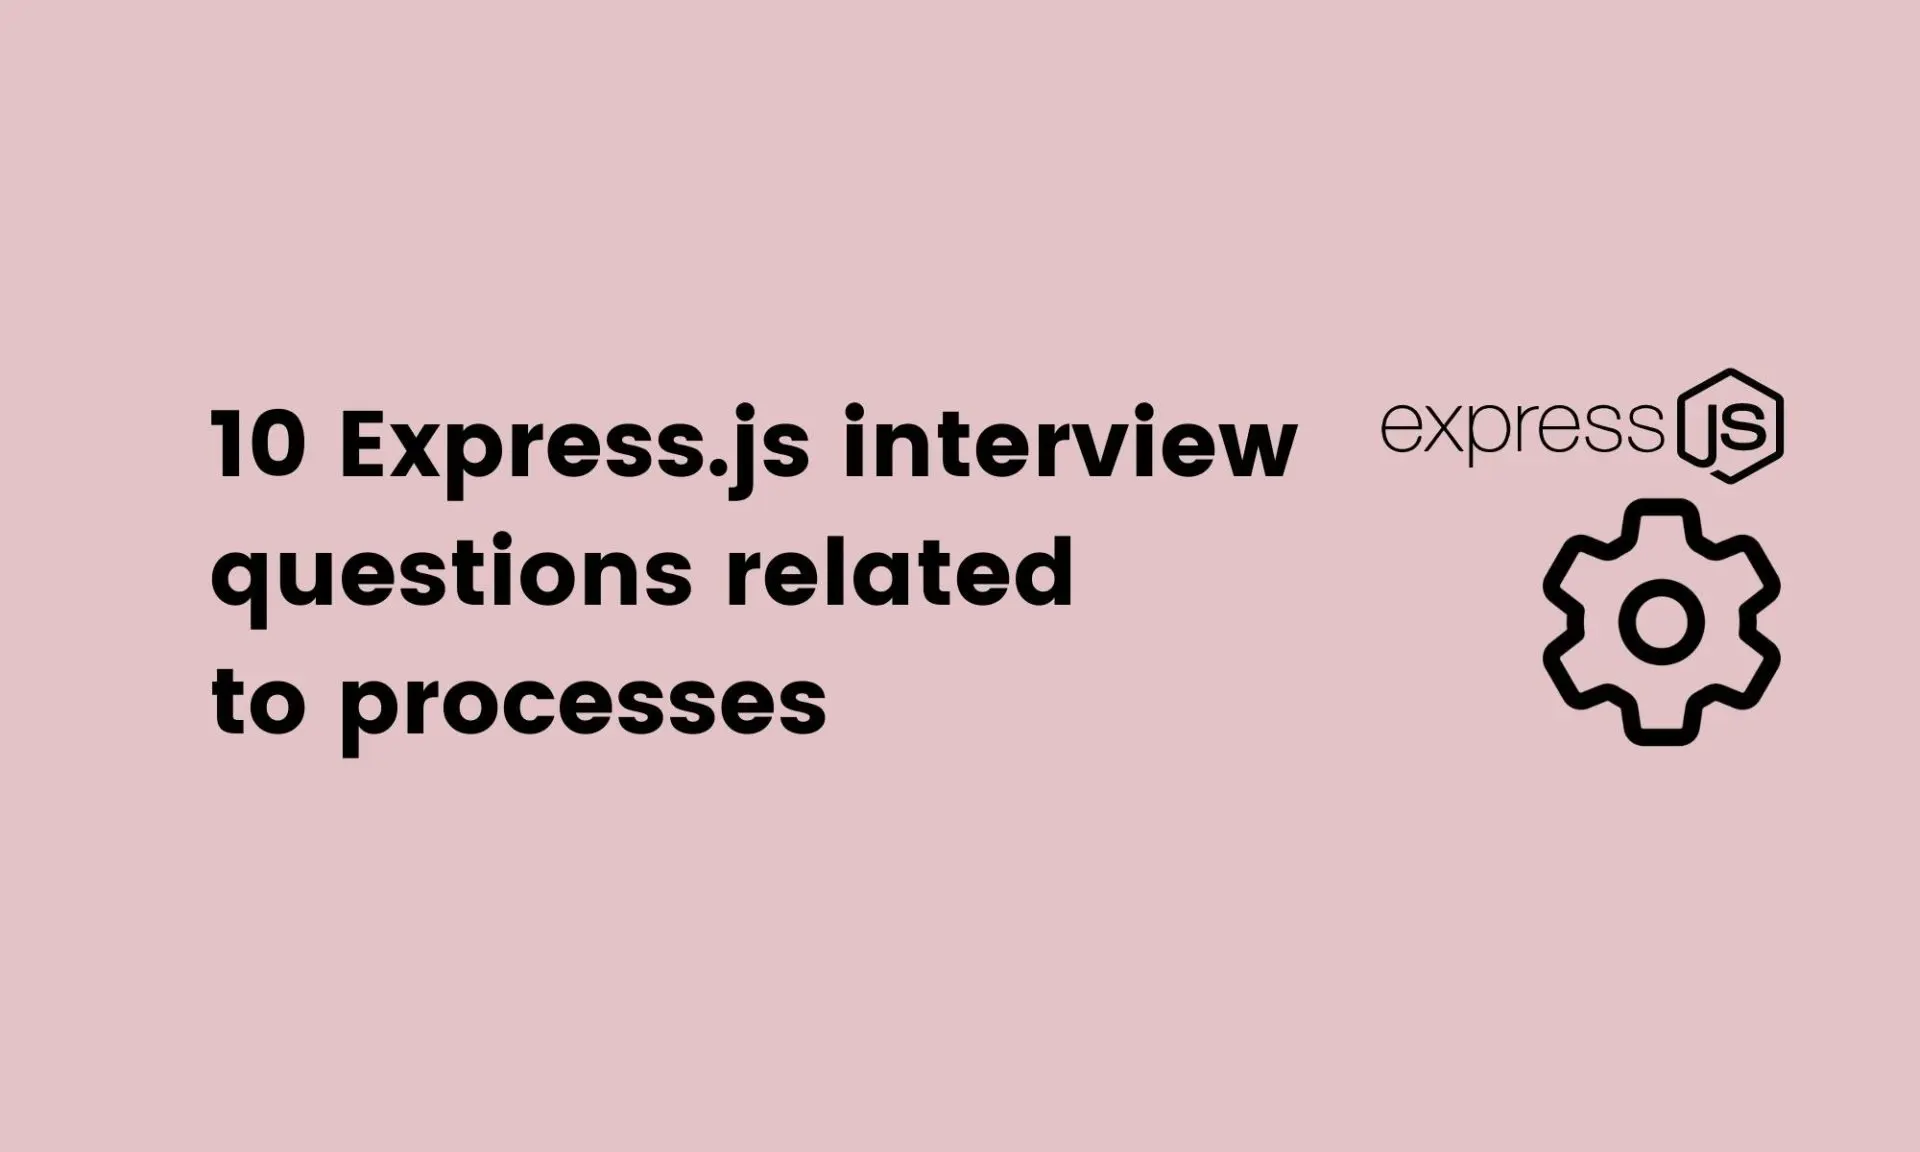 10 Express.js interview questions related to processes